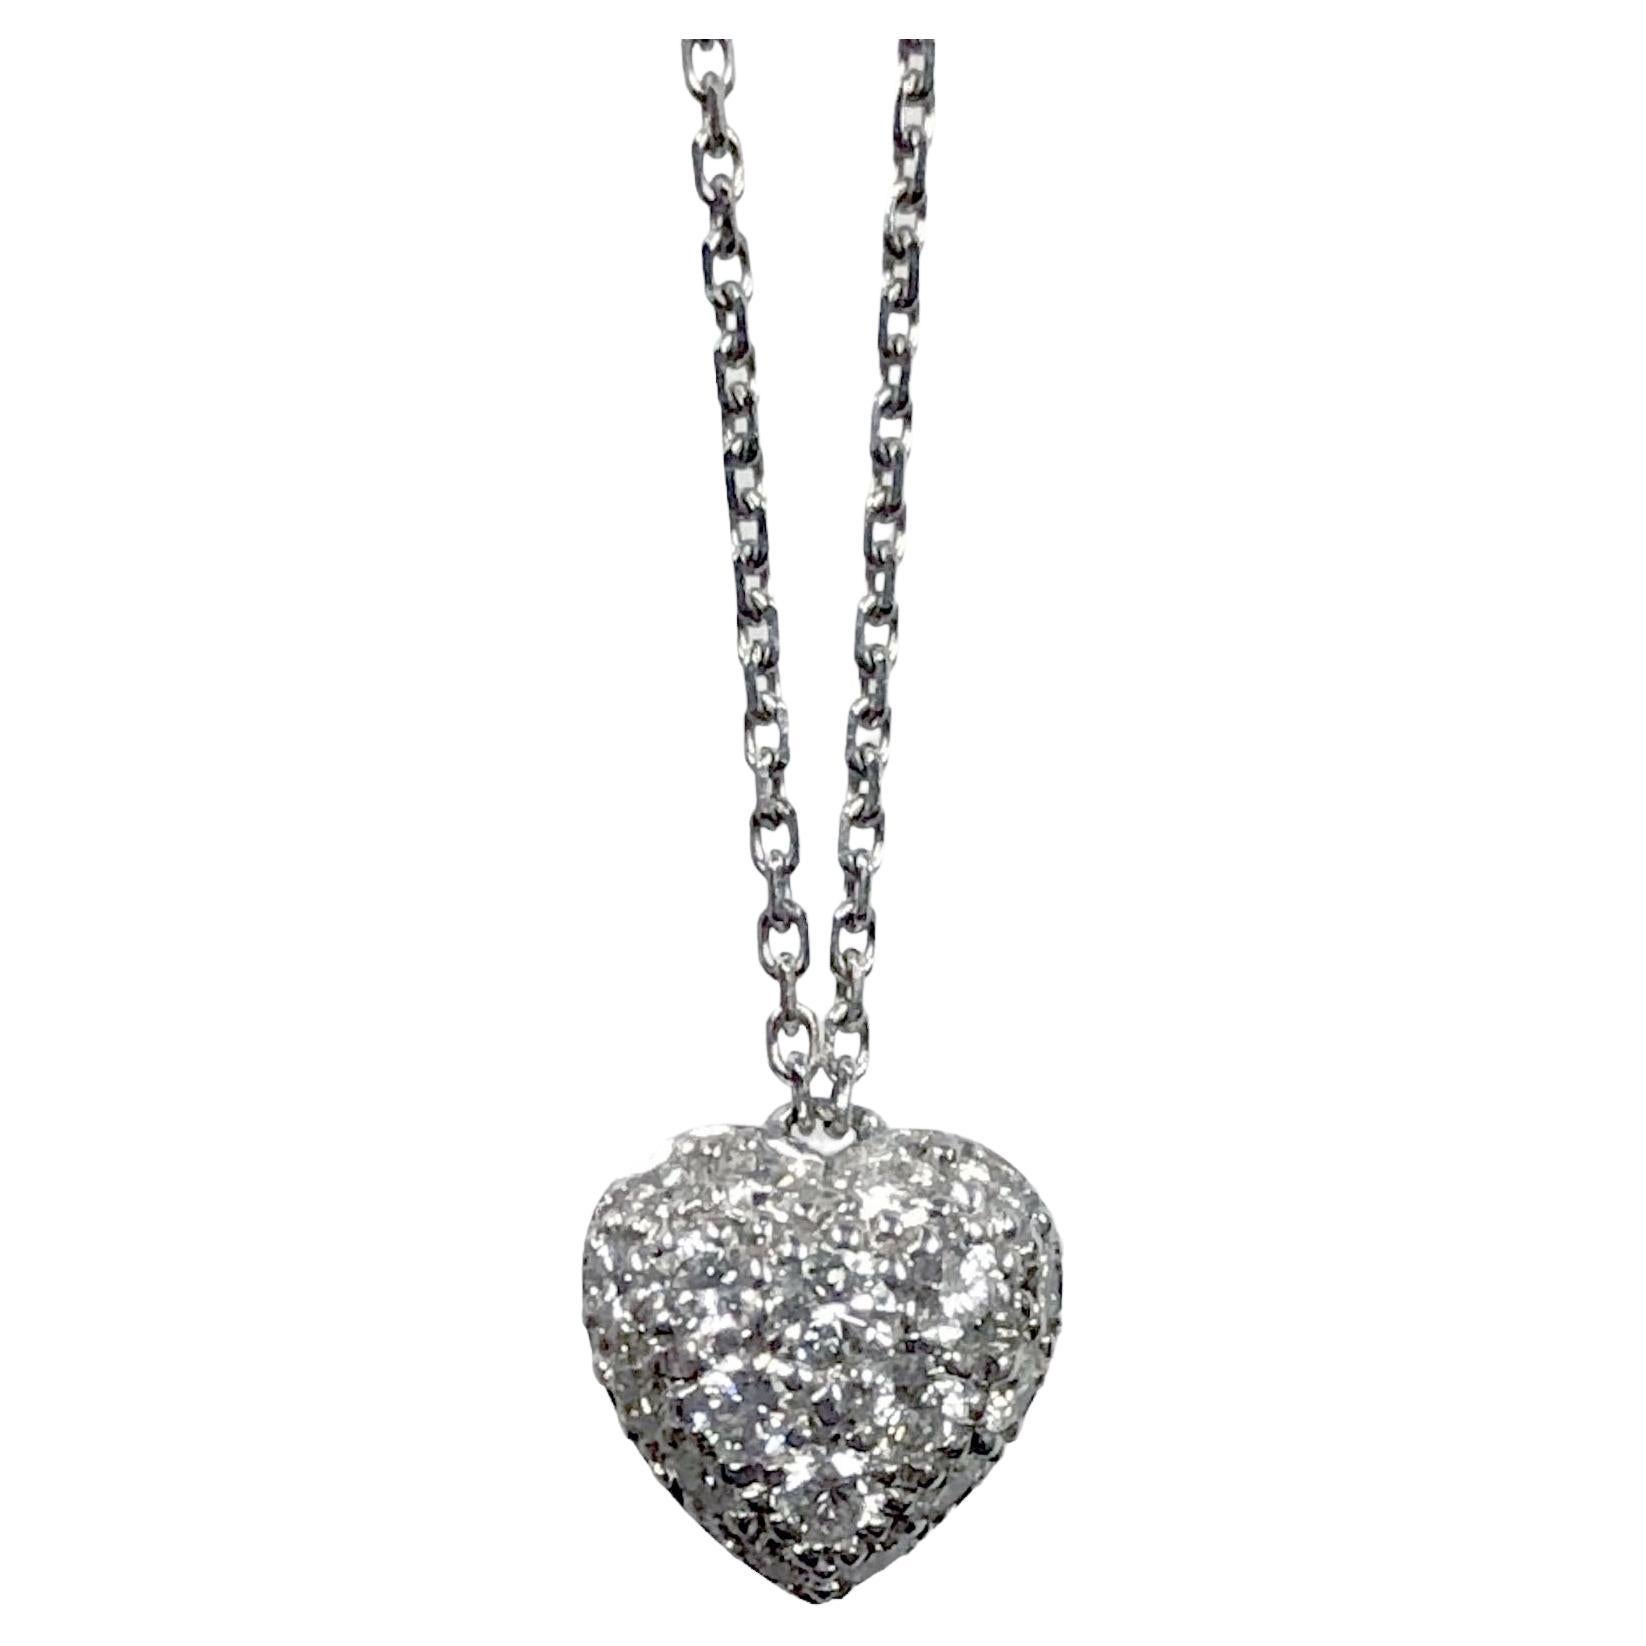 Cartier White Gold and Diamond Pave Heart Pendant necklace